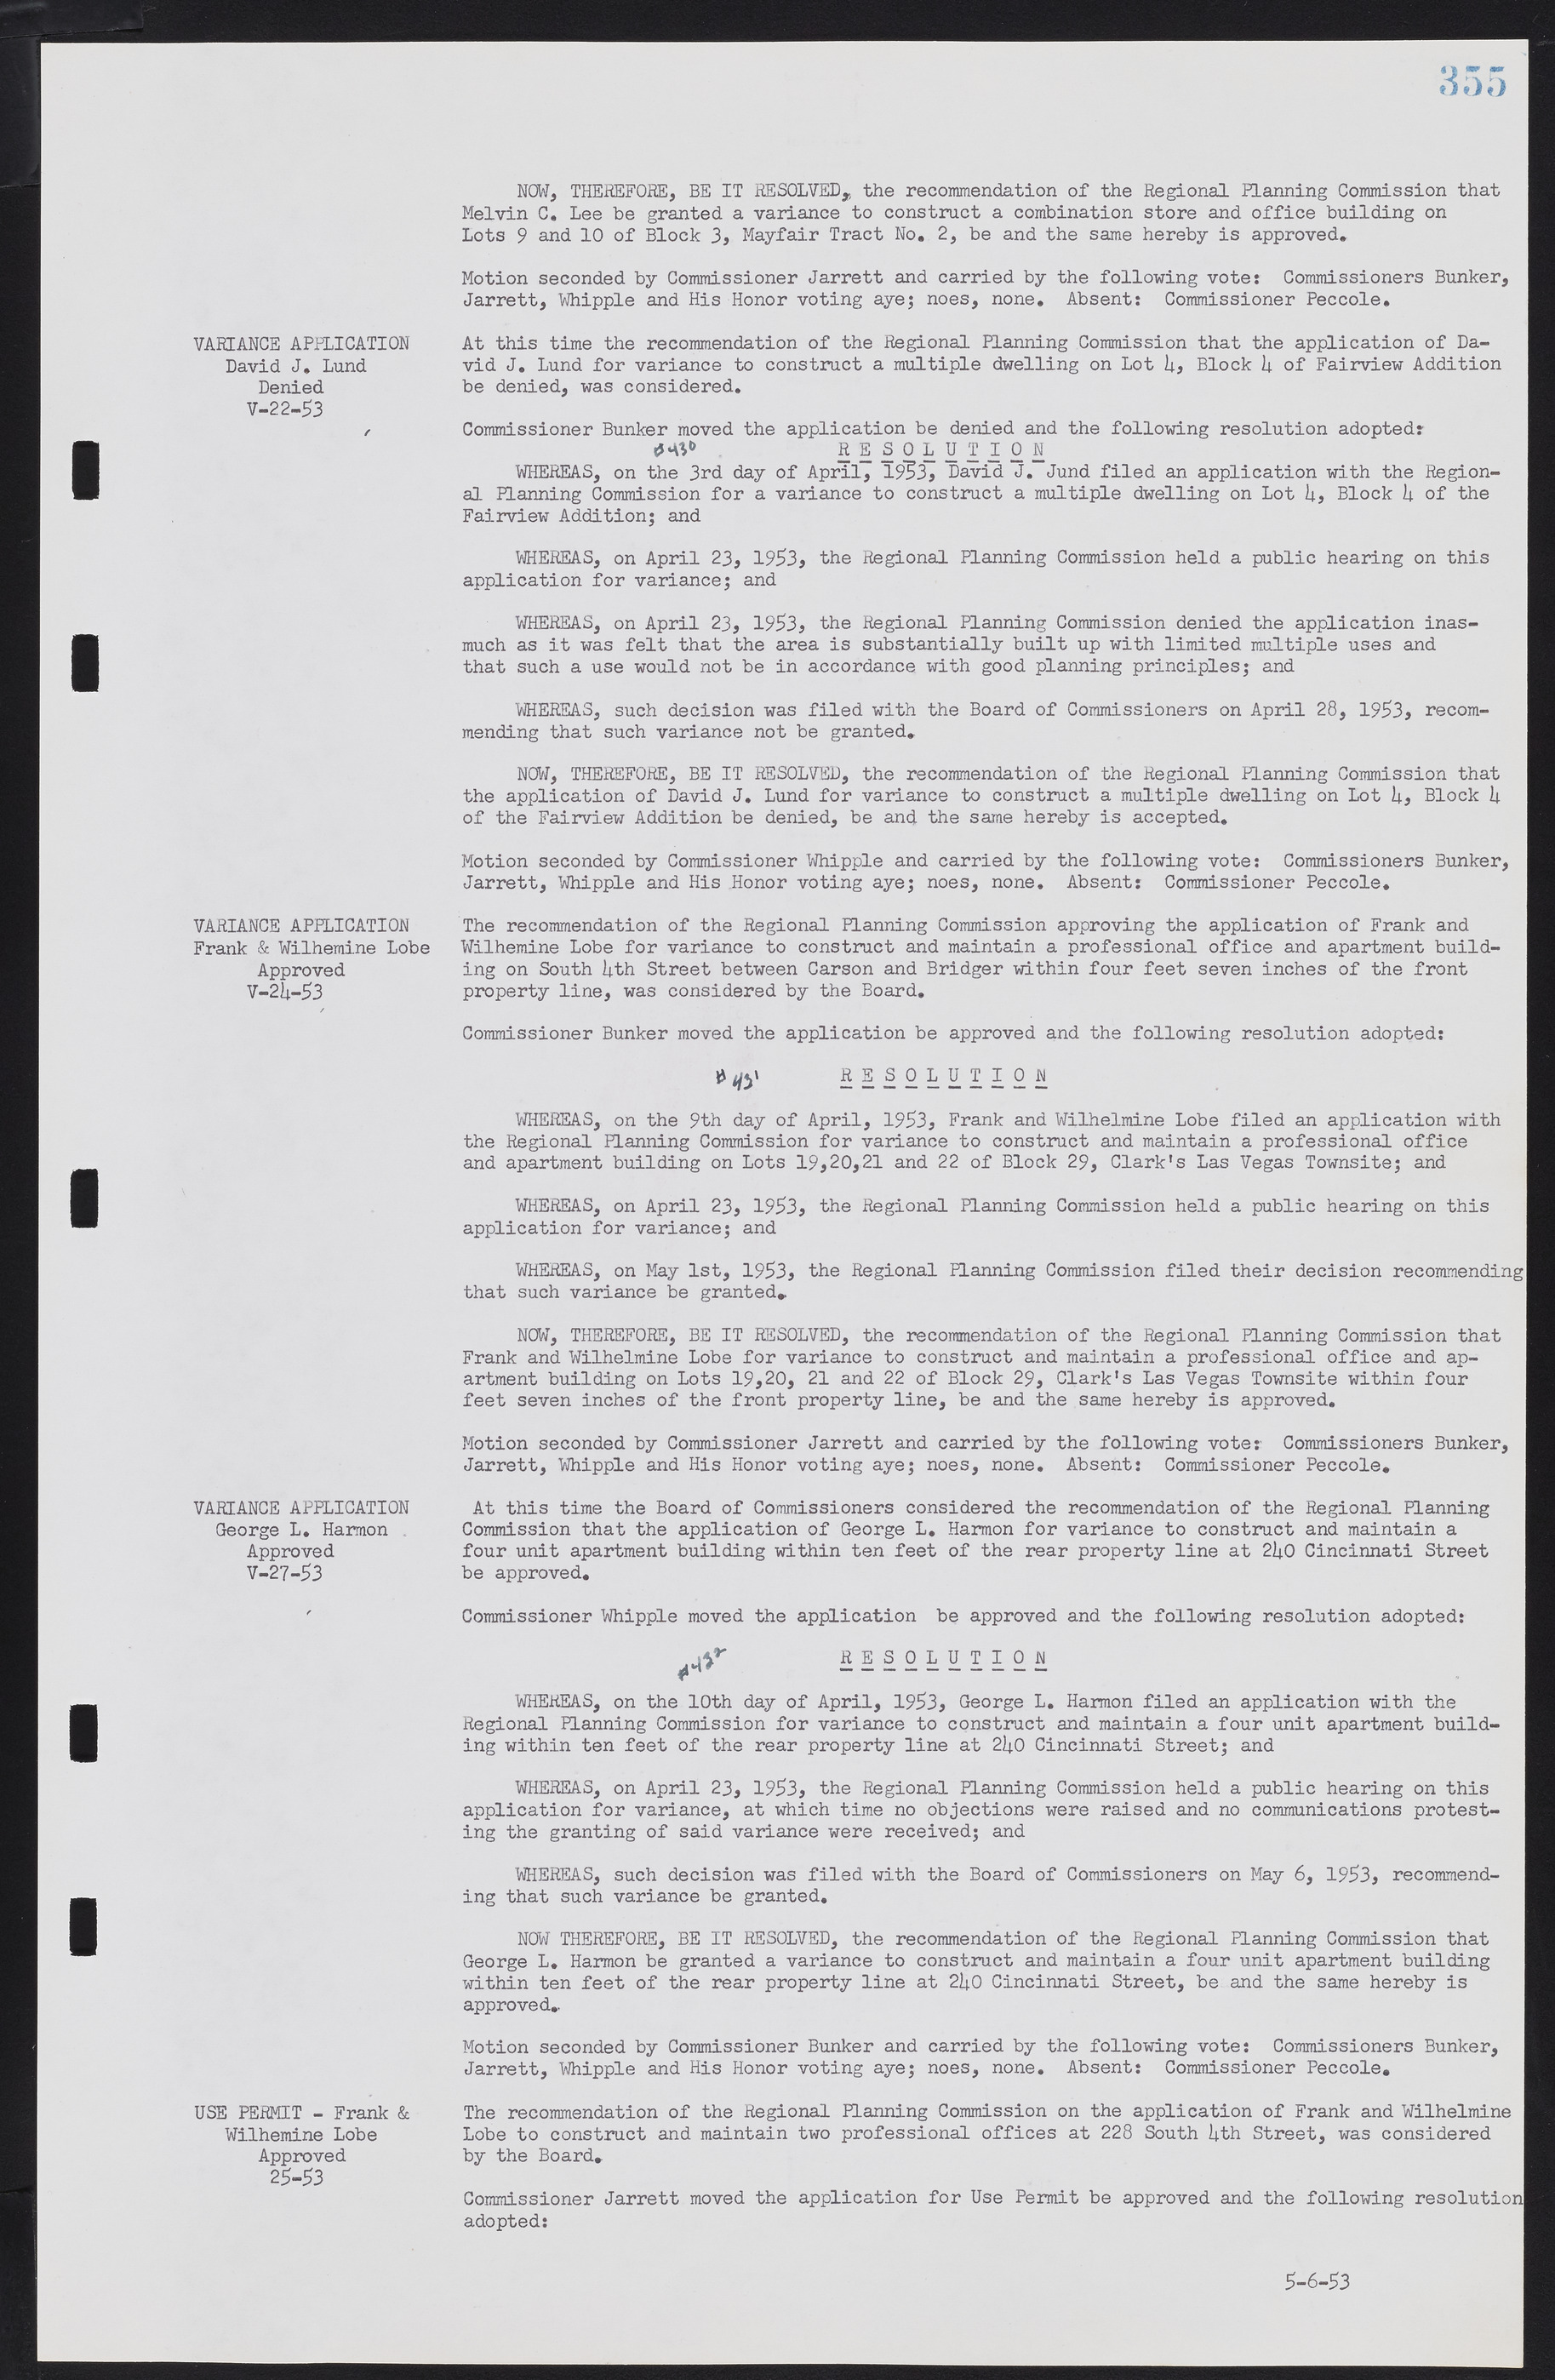 Las Vegas City Commission Minutes, May 26, 1952 to February 17, 1954, lvc000008-383